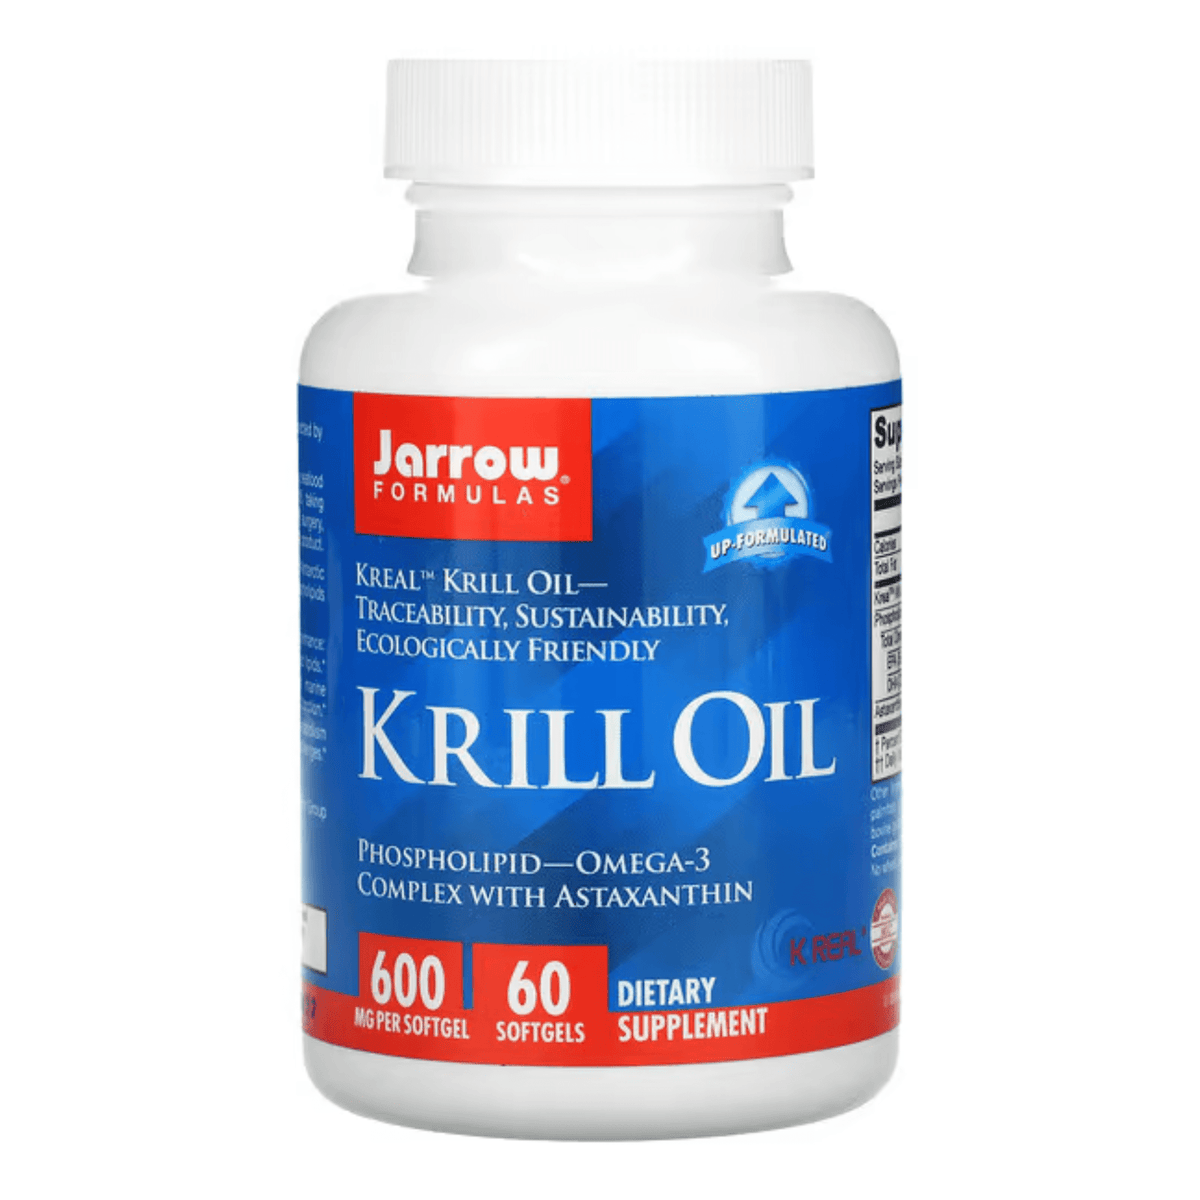 Primary Image of Krill Oil Softgels